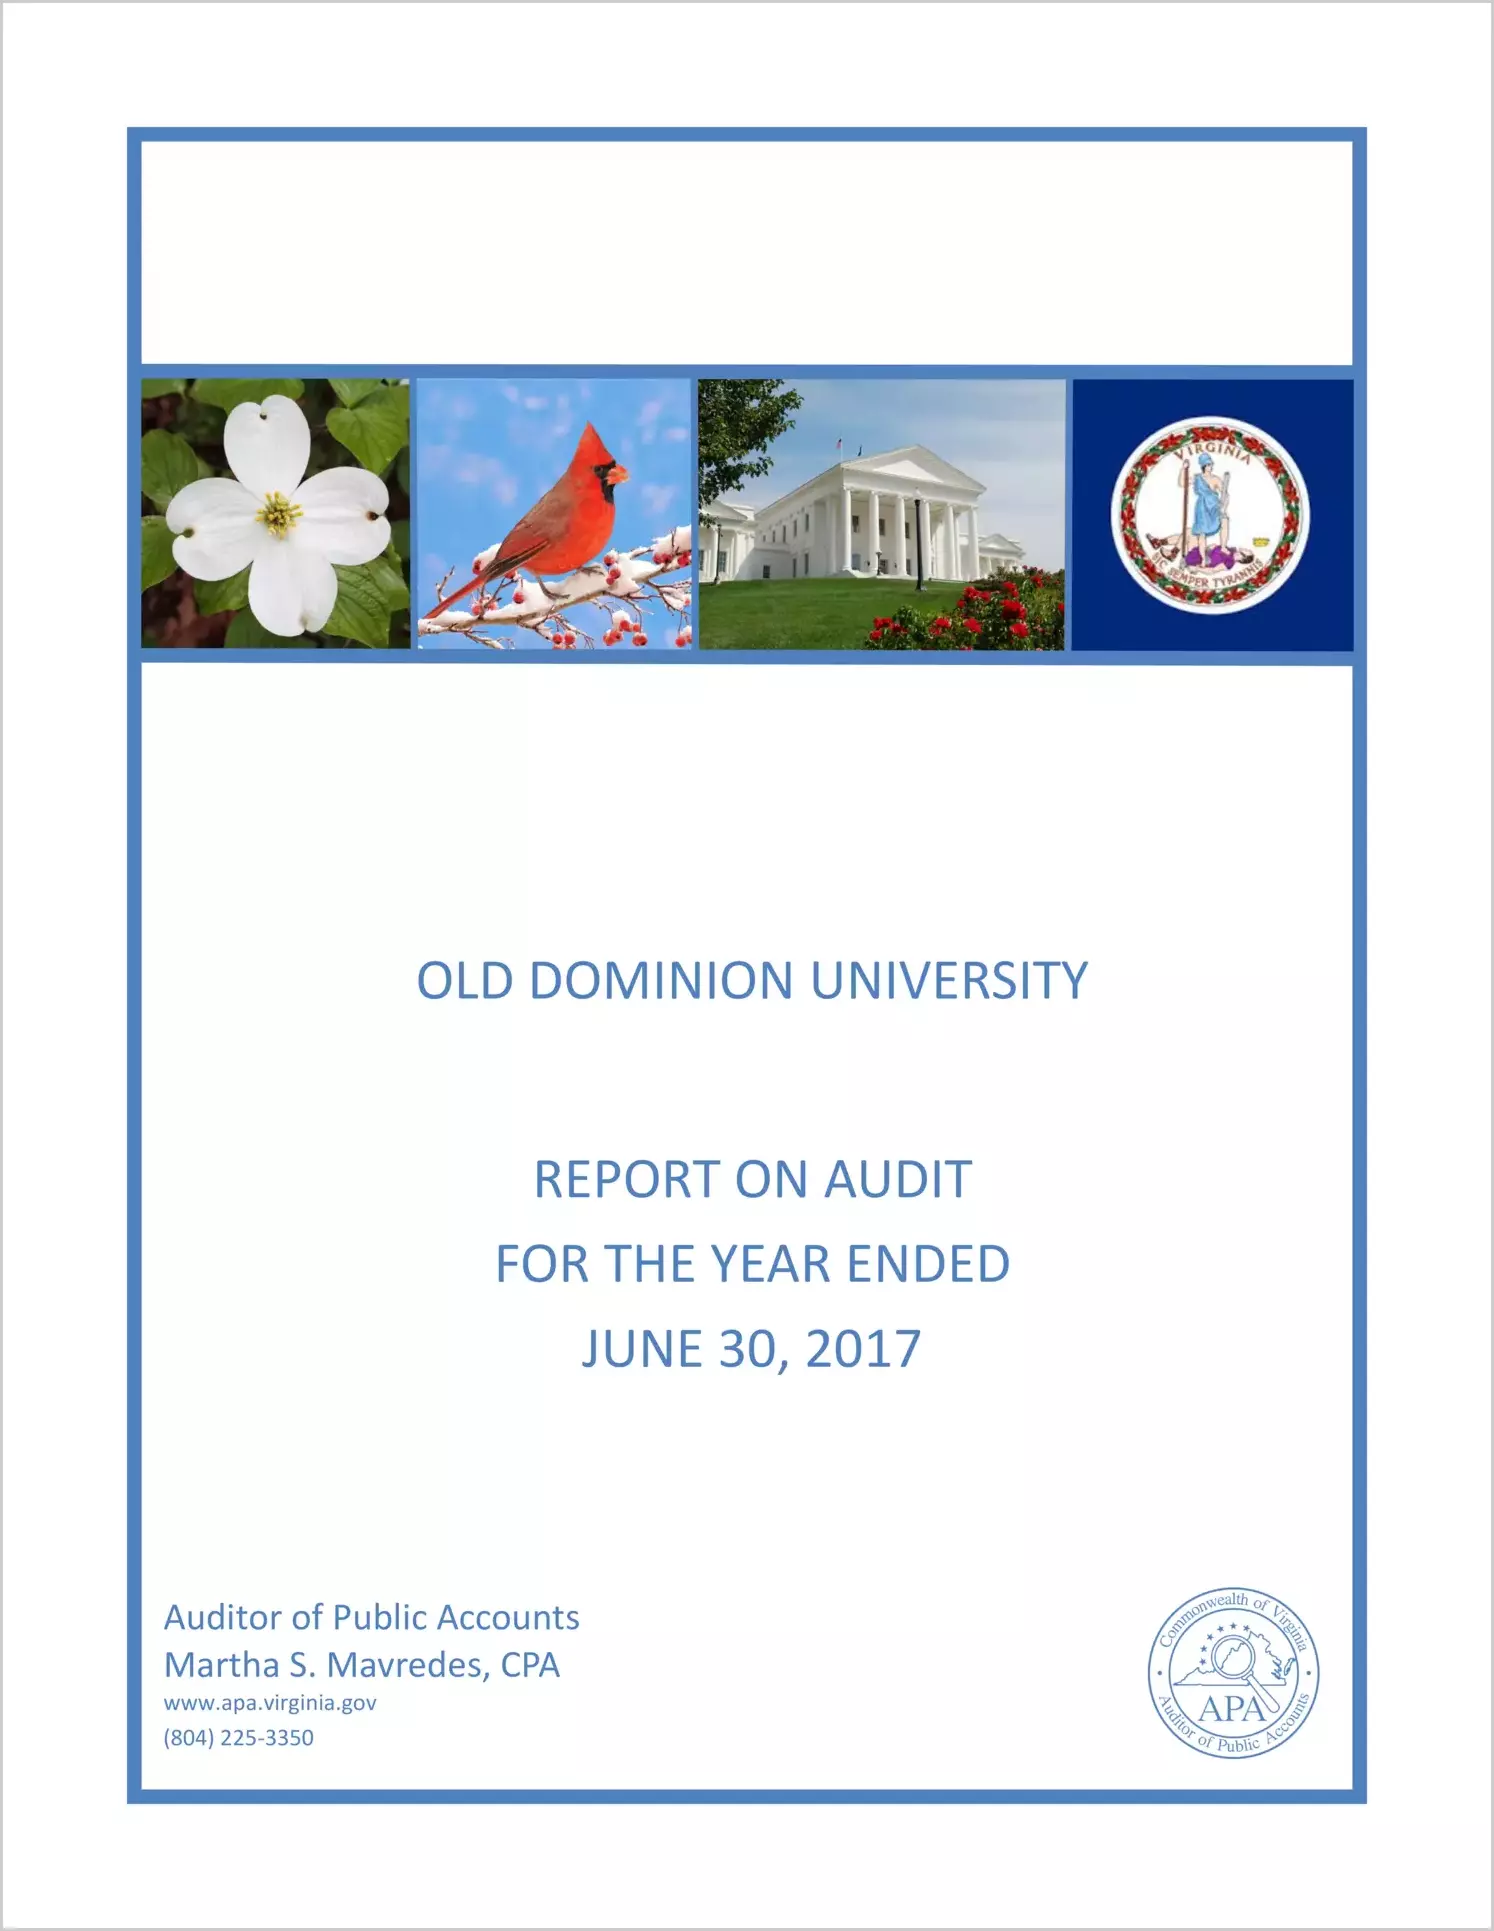 Old Dominion University for the year ended June 30, 2017